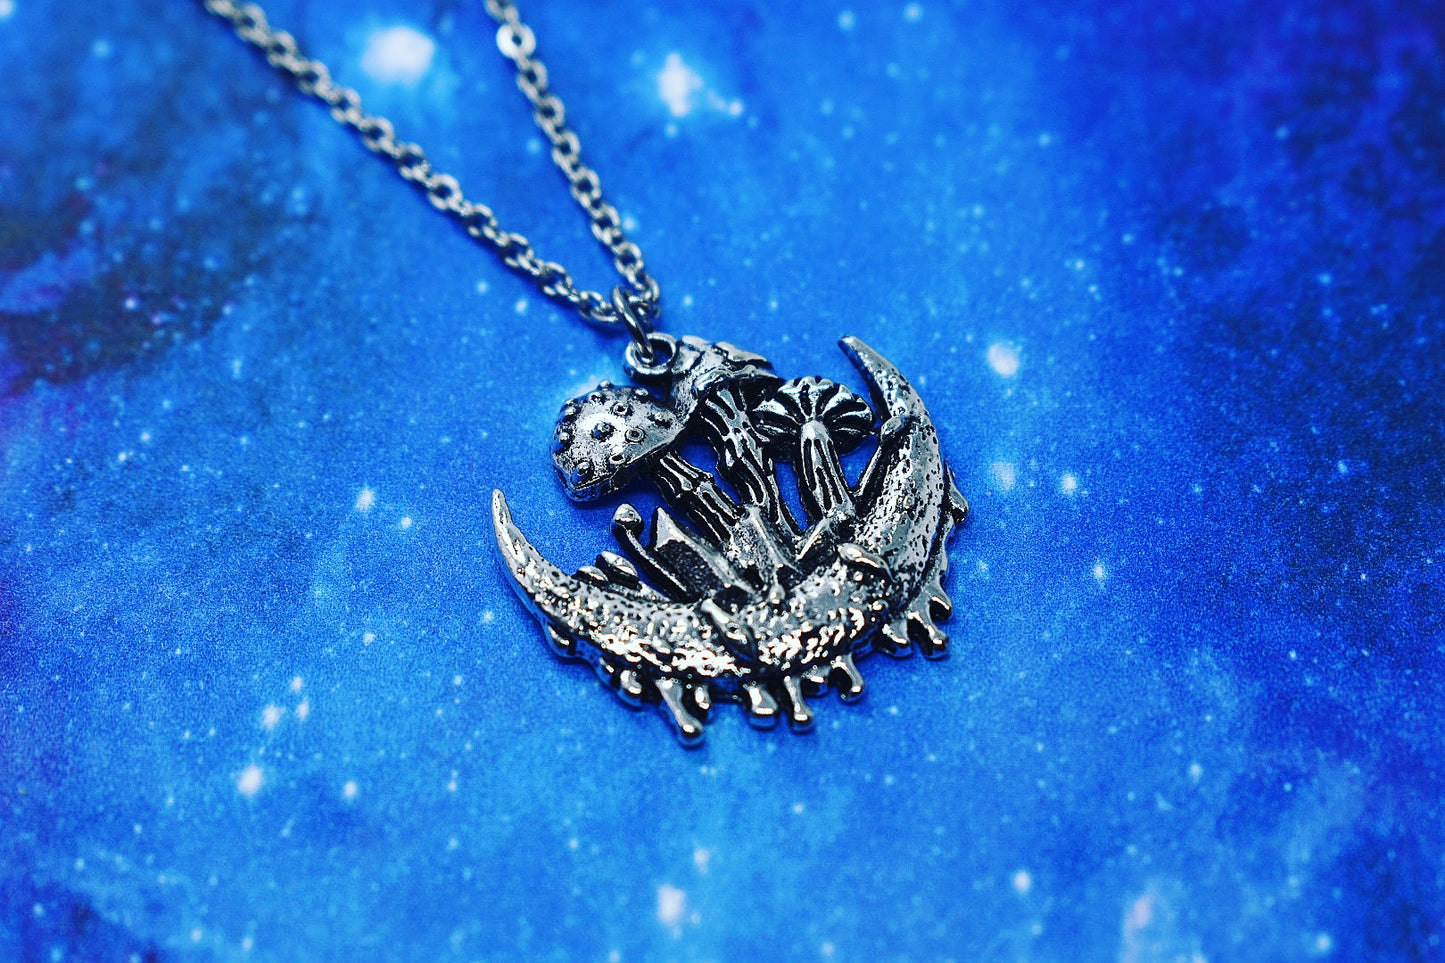 Necklace with crescent moon, mushroom and crystal pendant